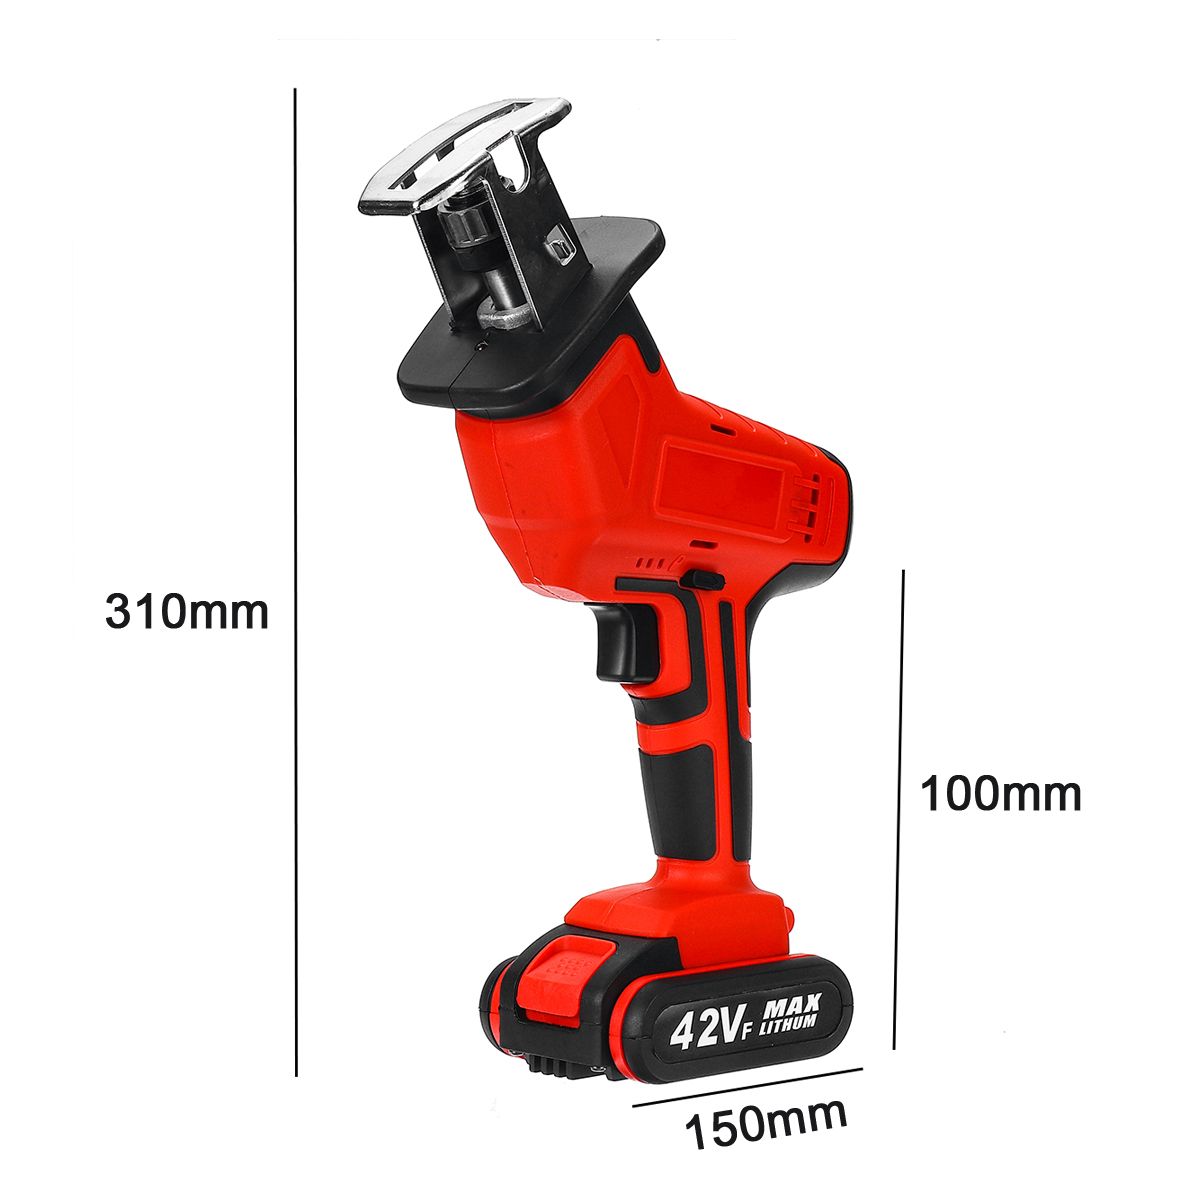 42VF-13000mAh-Cordless-Reciprocating-Saw-Electric-Saws-Portable-Woodworking-Power-Tools-1640981